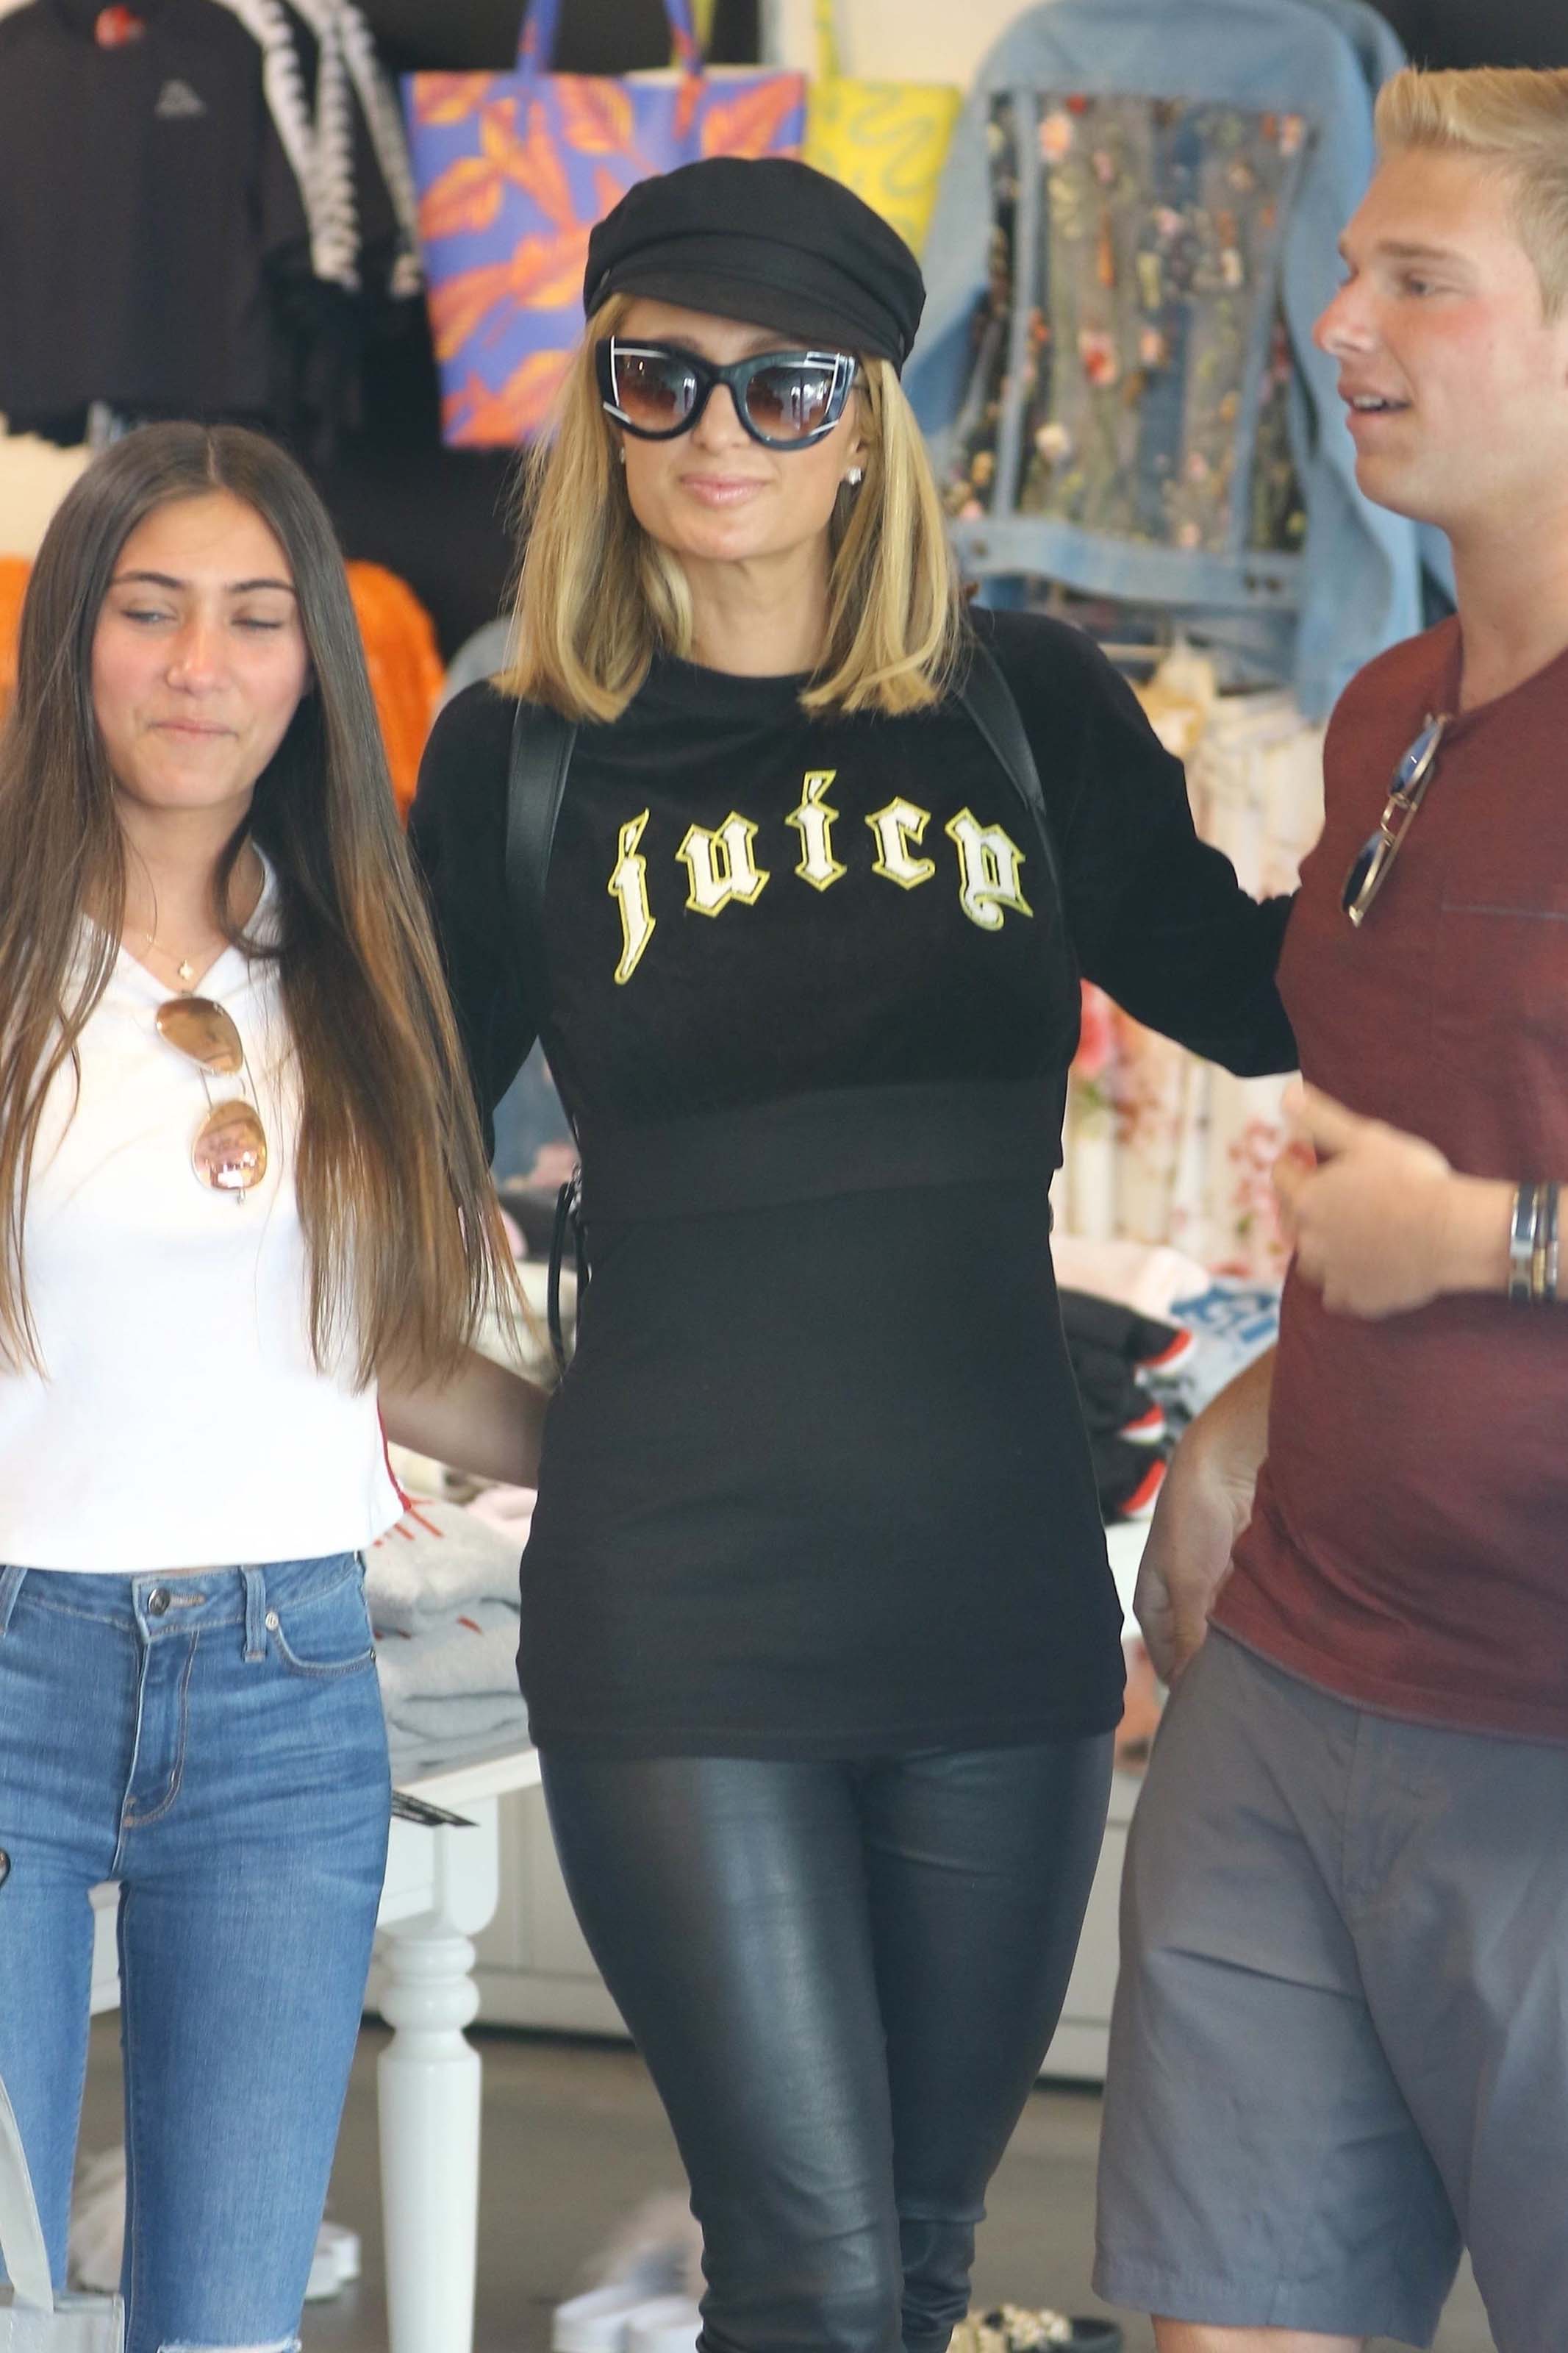 Paris Hilton shopping in West Hollywood